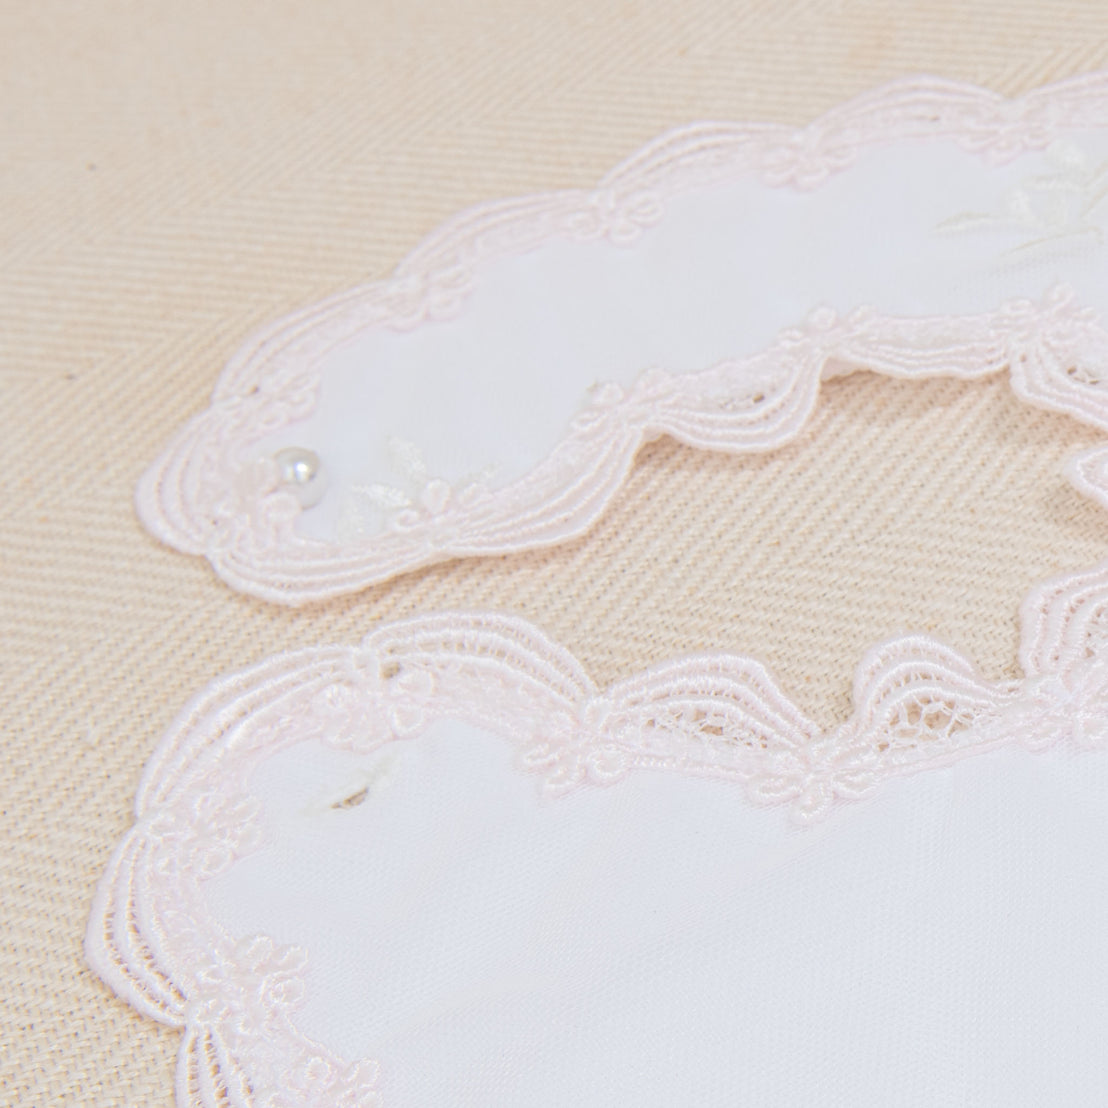 Close-up of delicate pink lace with vintage-inspired floral embroidery and tiny pearl embellishments on a beige fabric background, highlighting detailed craftsmanship of the Joli Bib.